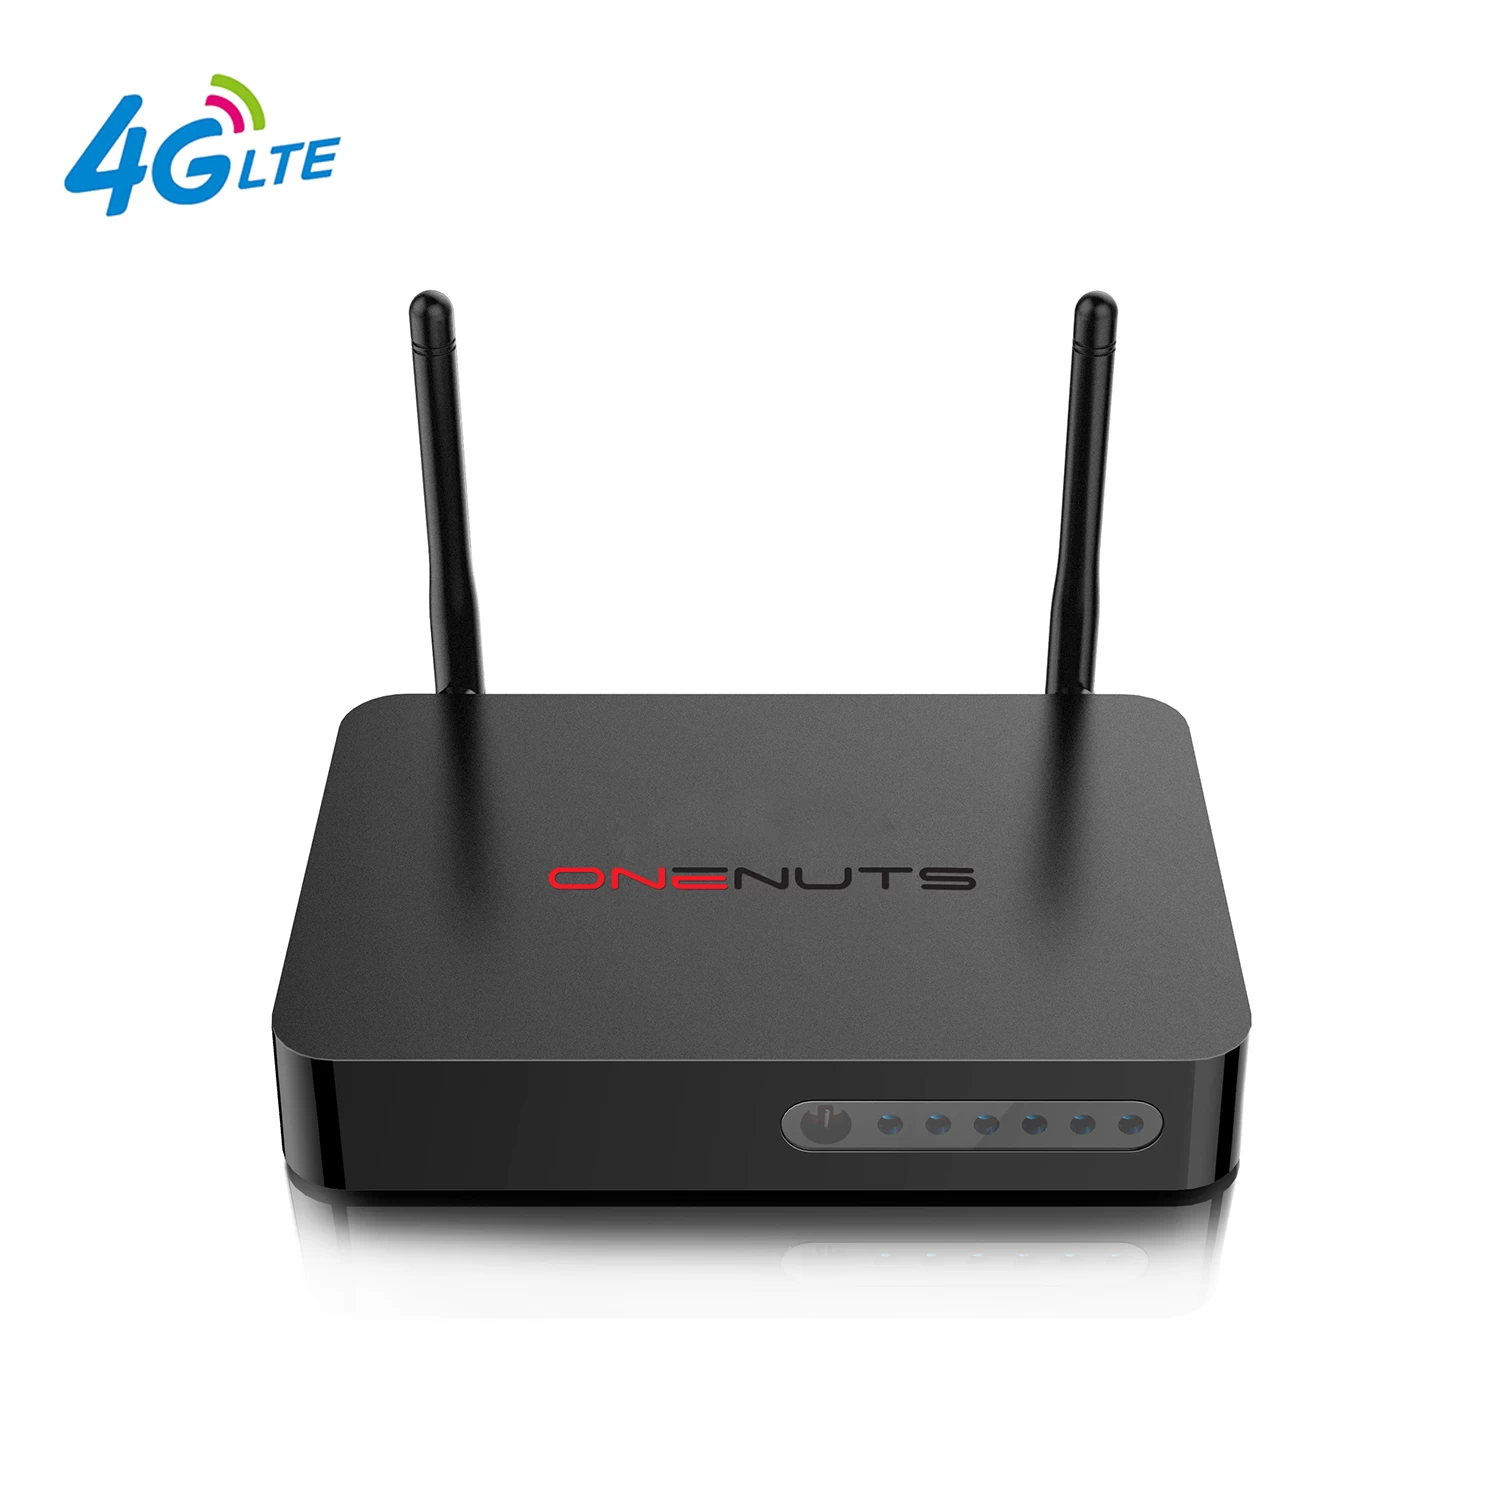 Android TV Box Huawei WCDMA Modem built in, Android TV Box WCDMA 4G/3G Dongle